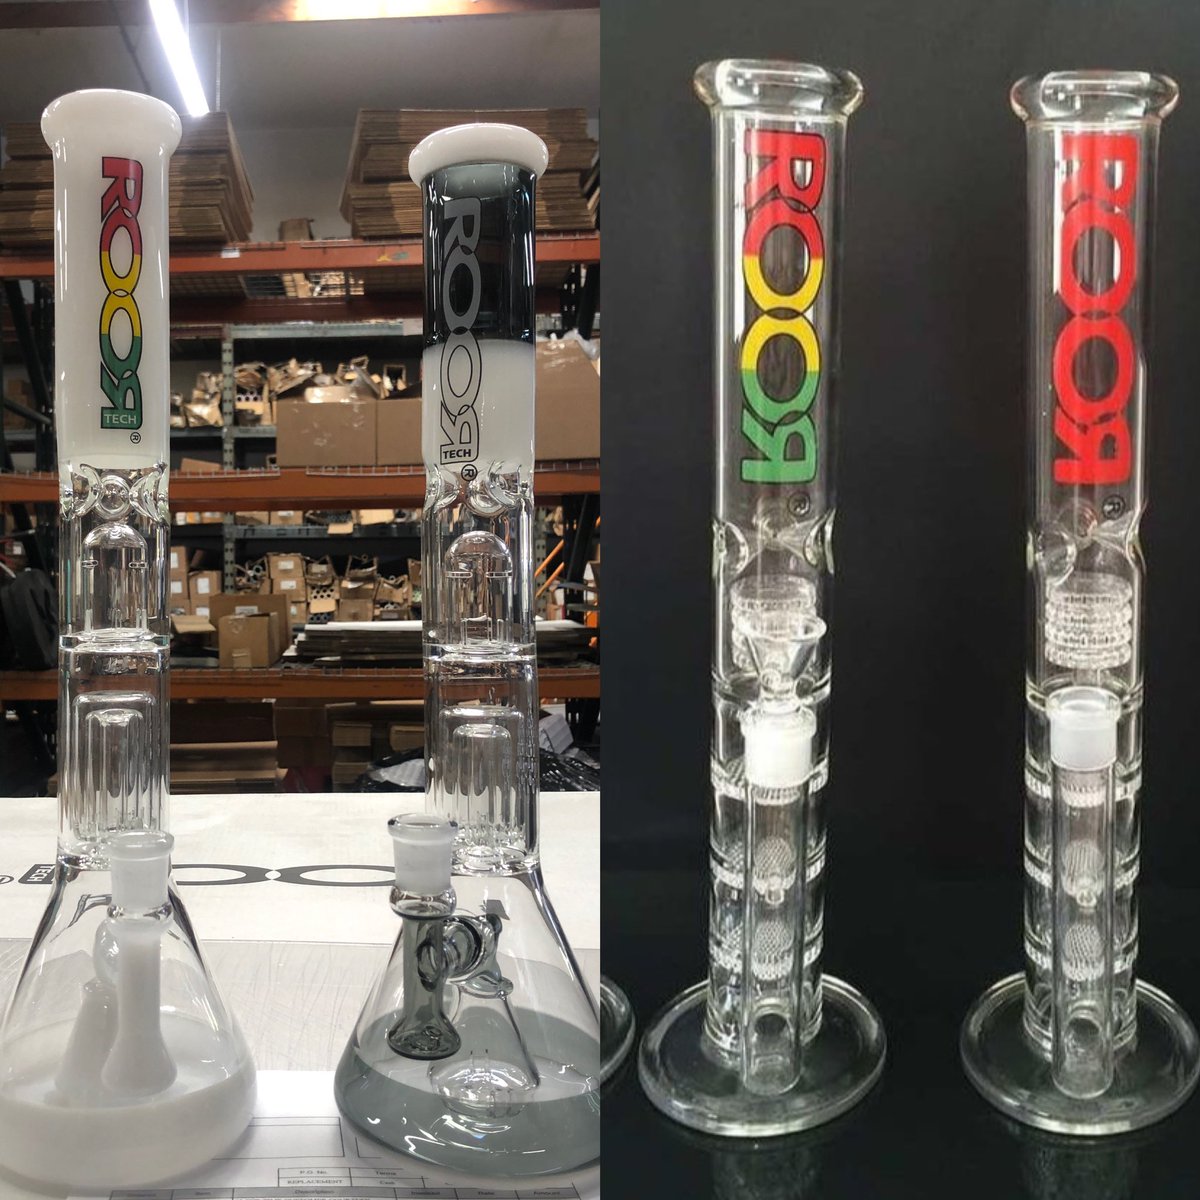 6) RooR-Tech! Aka Roors with percs! Beware! Many shops will try to pass off Honeycomb/Jacuzzi perc pieces (see image to Right) as RooR Tech but we do NOT produce these types of percs! Plus the decal will always say RooR Tech rather than just RooR